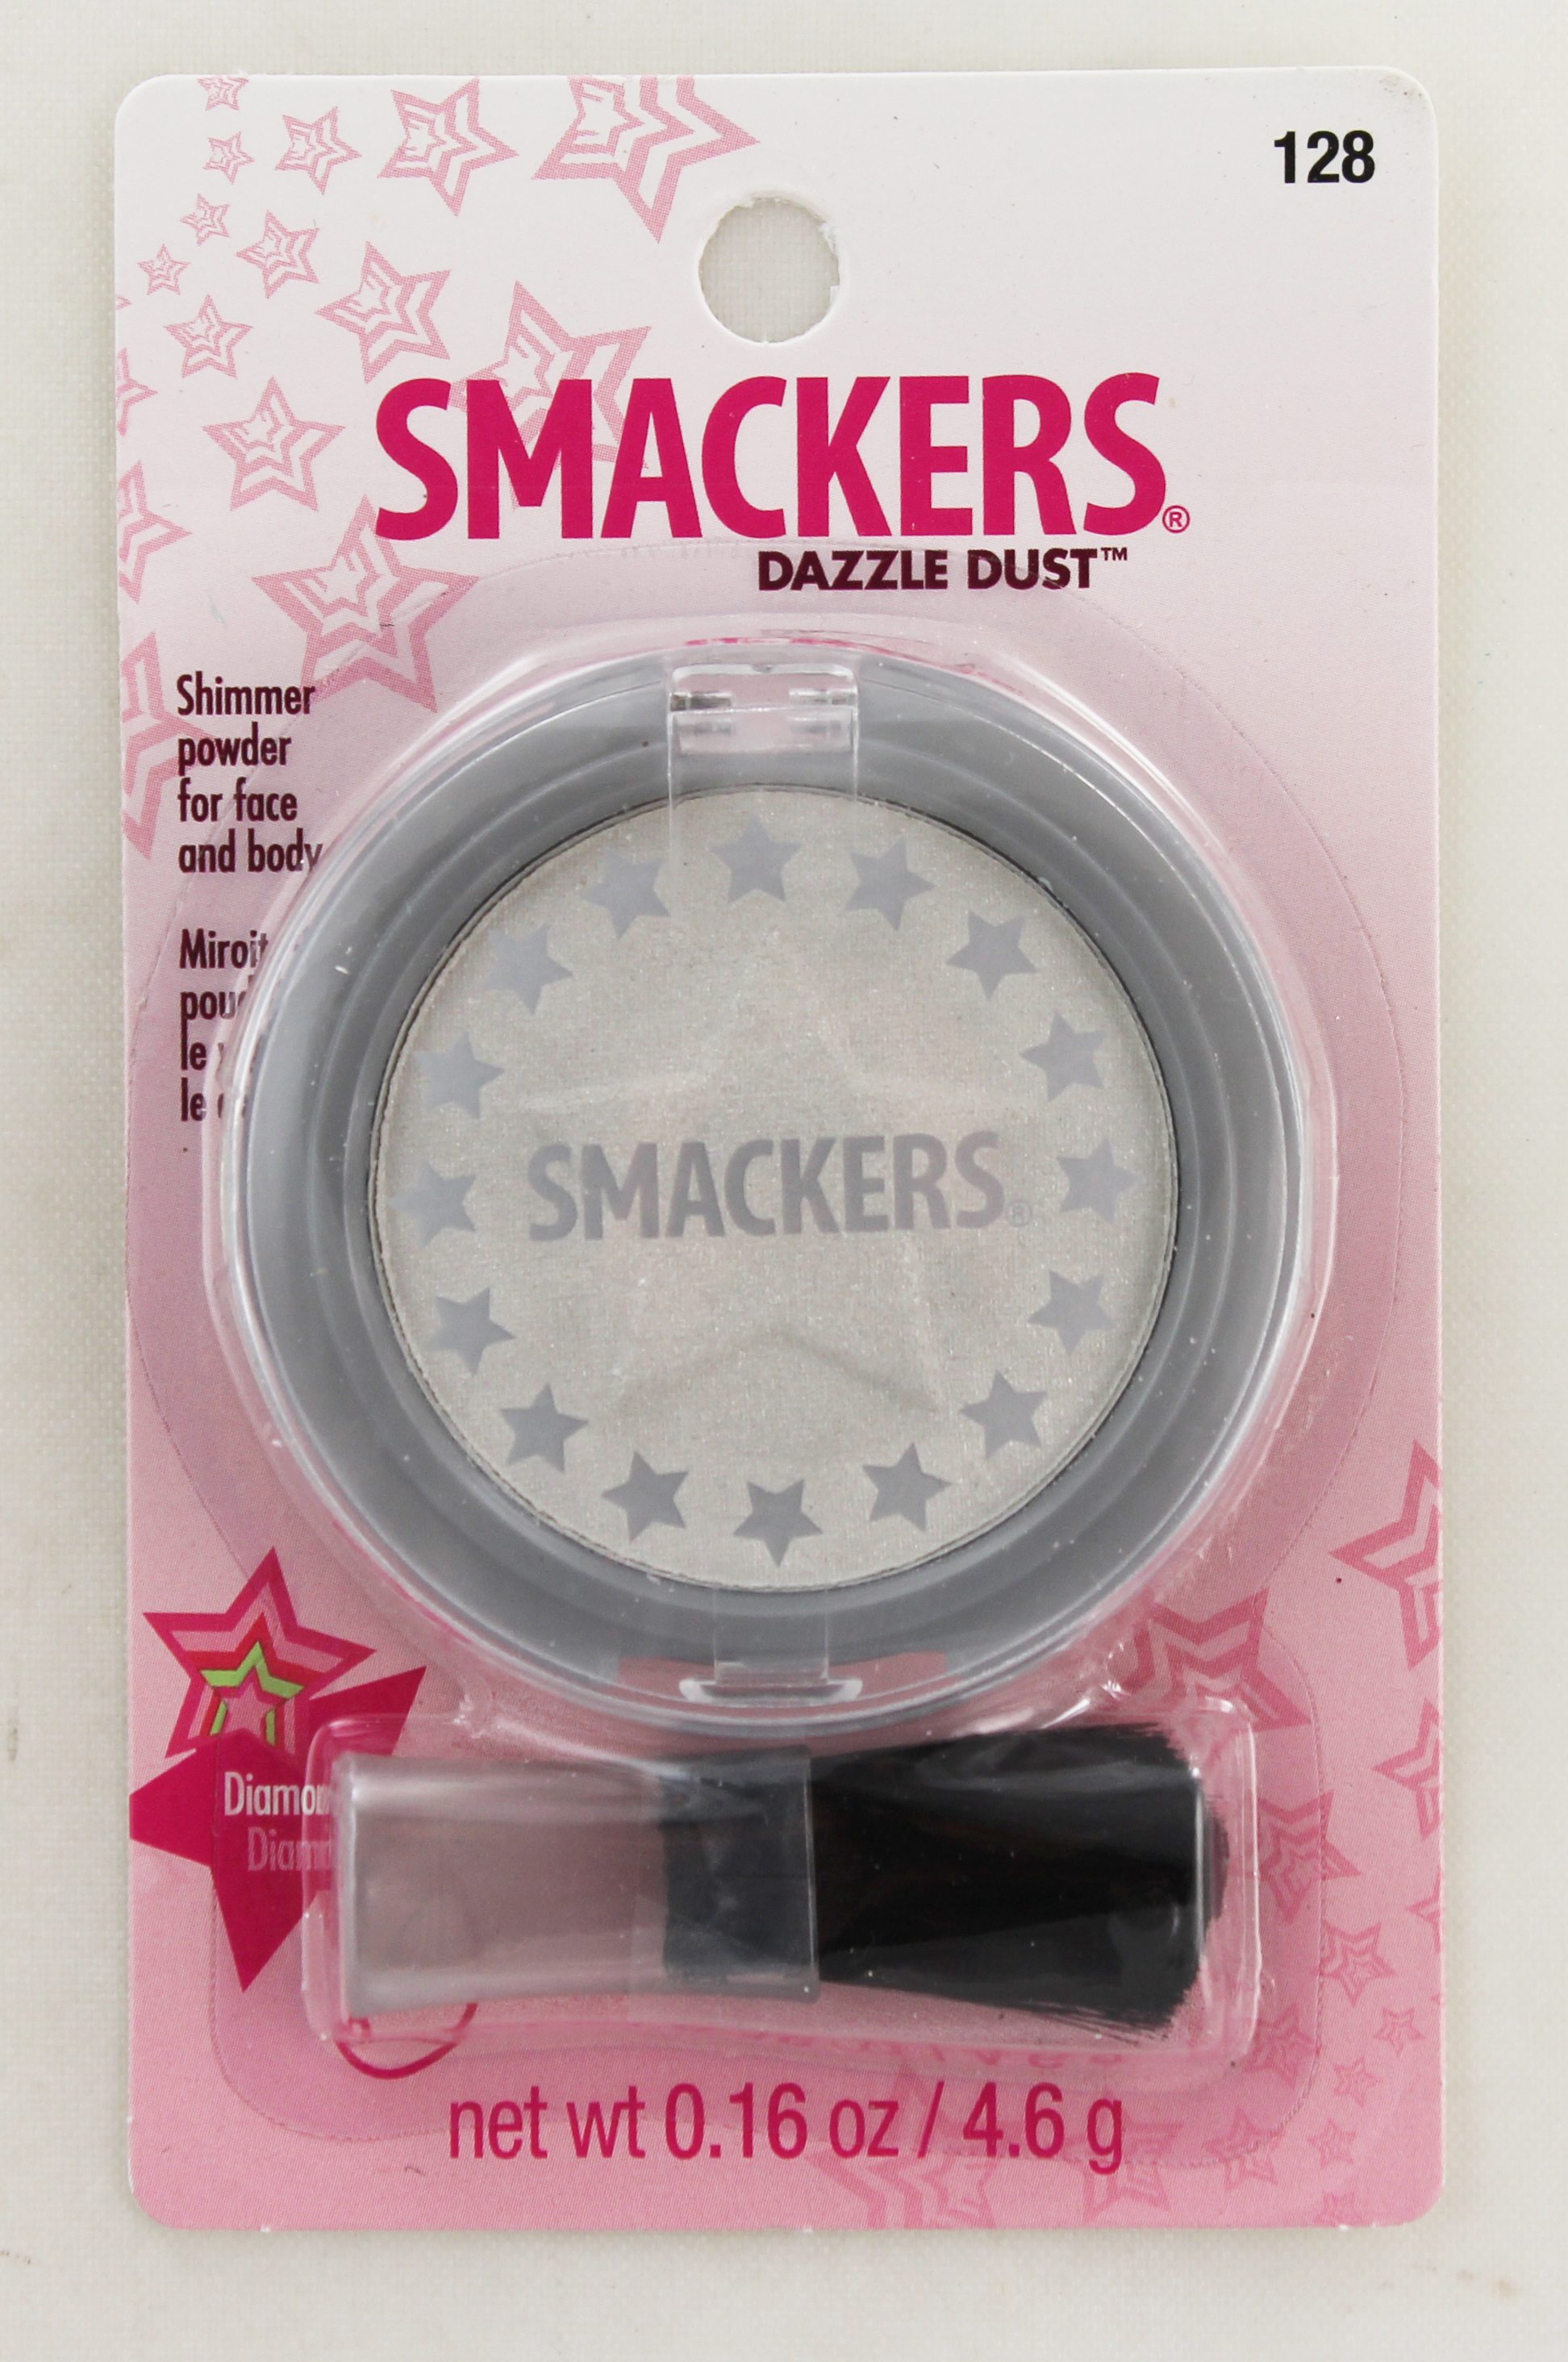 Lip Smackers Dazzle Dust Shimmer Powder For Face and Body With